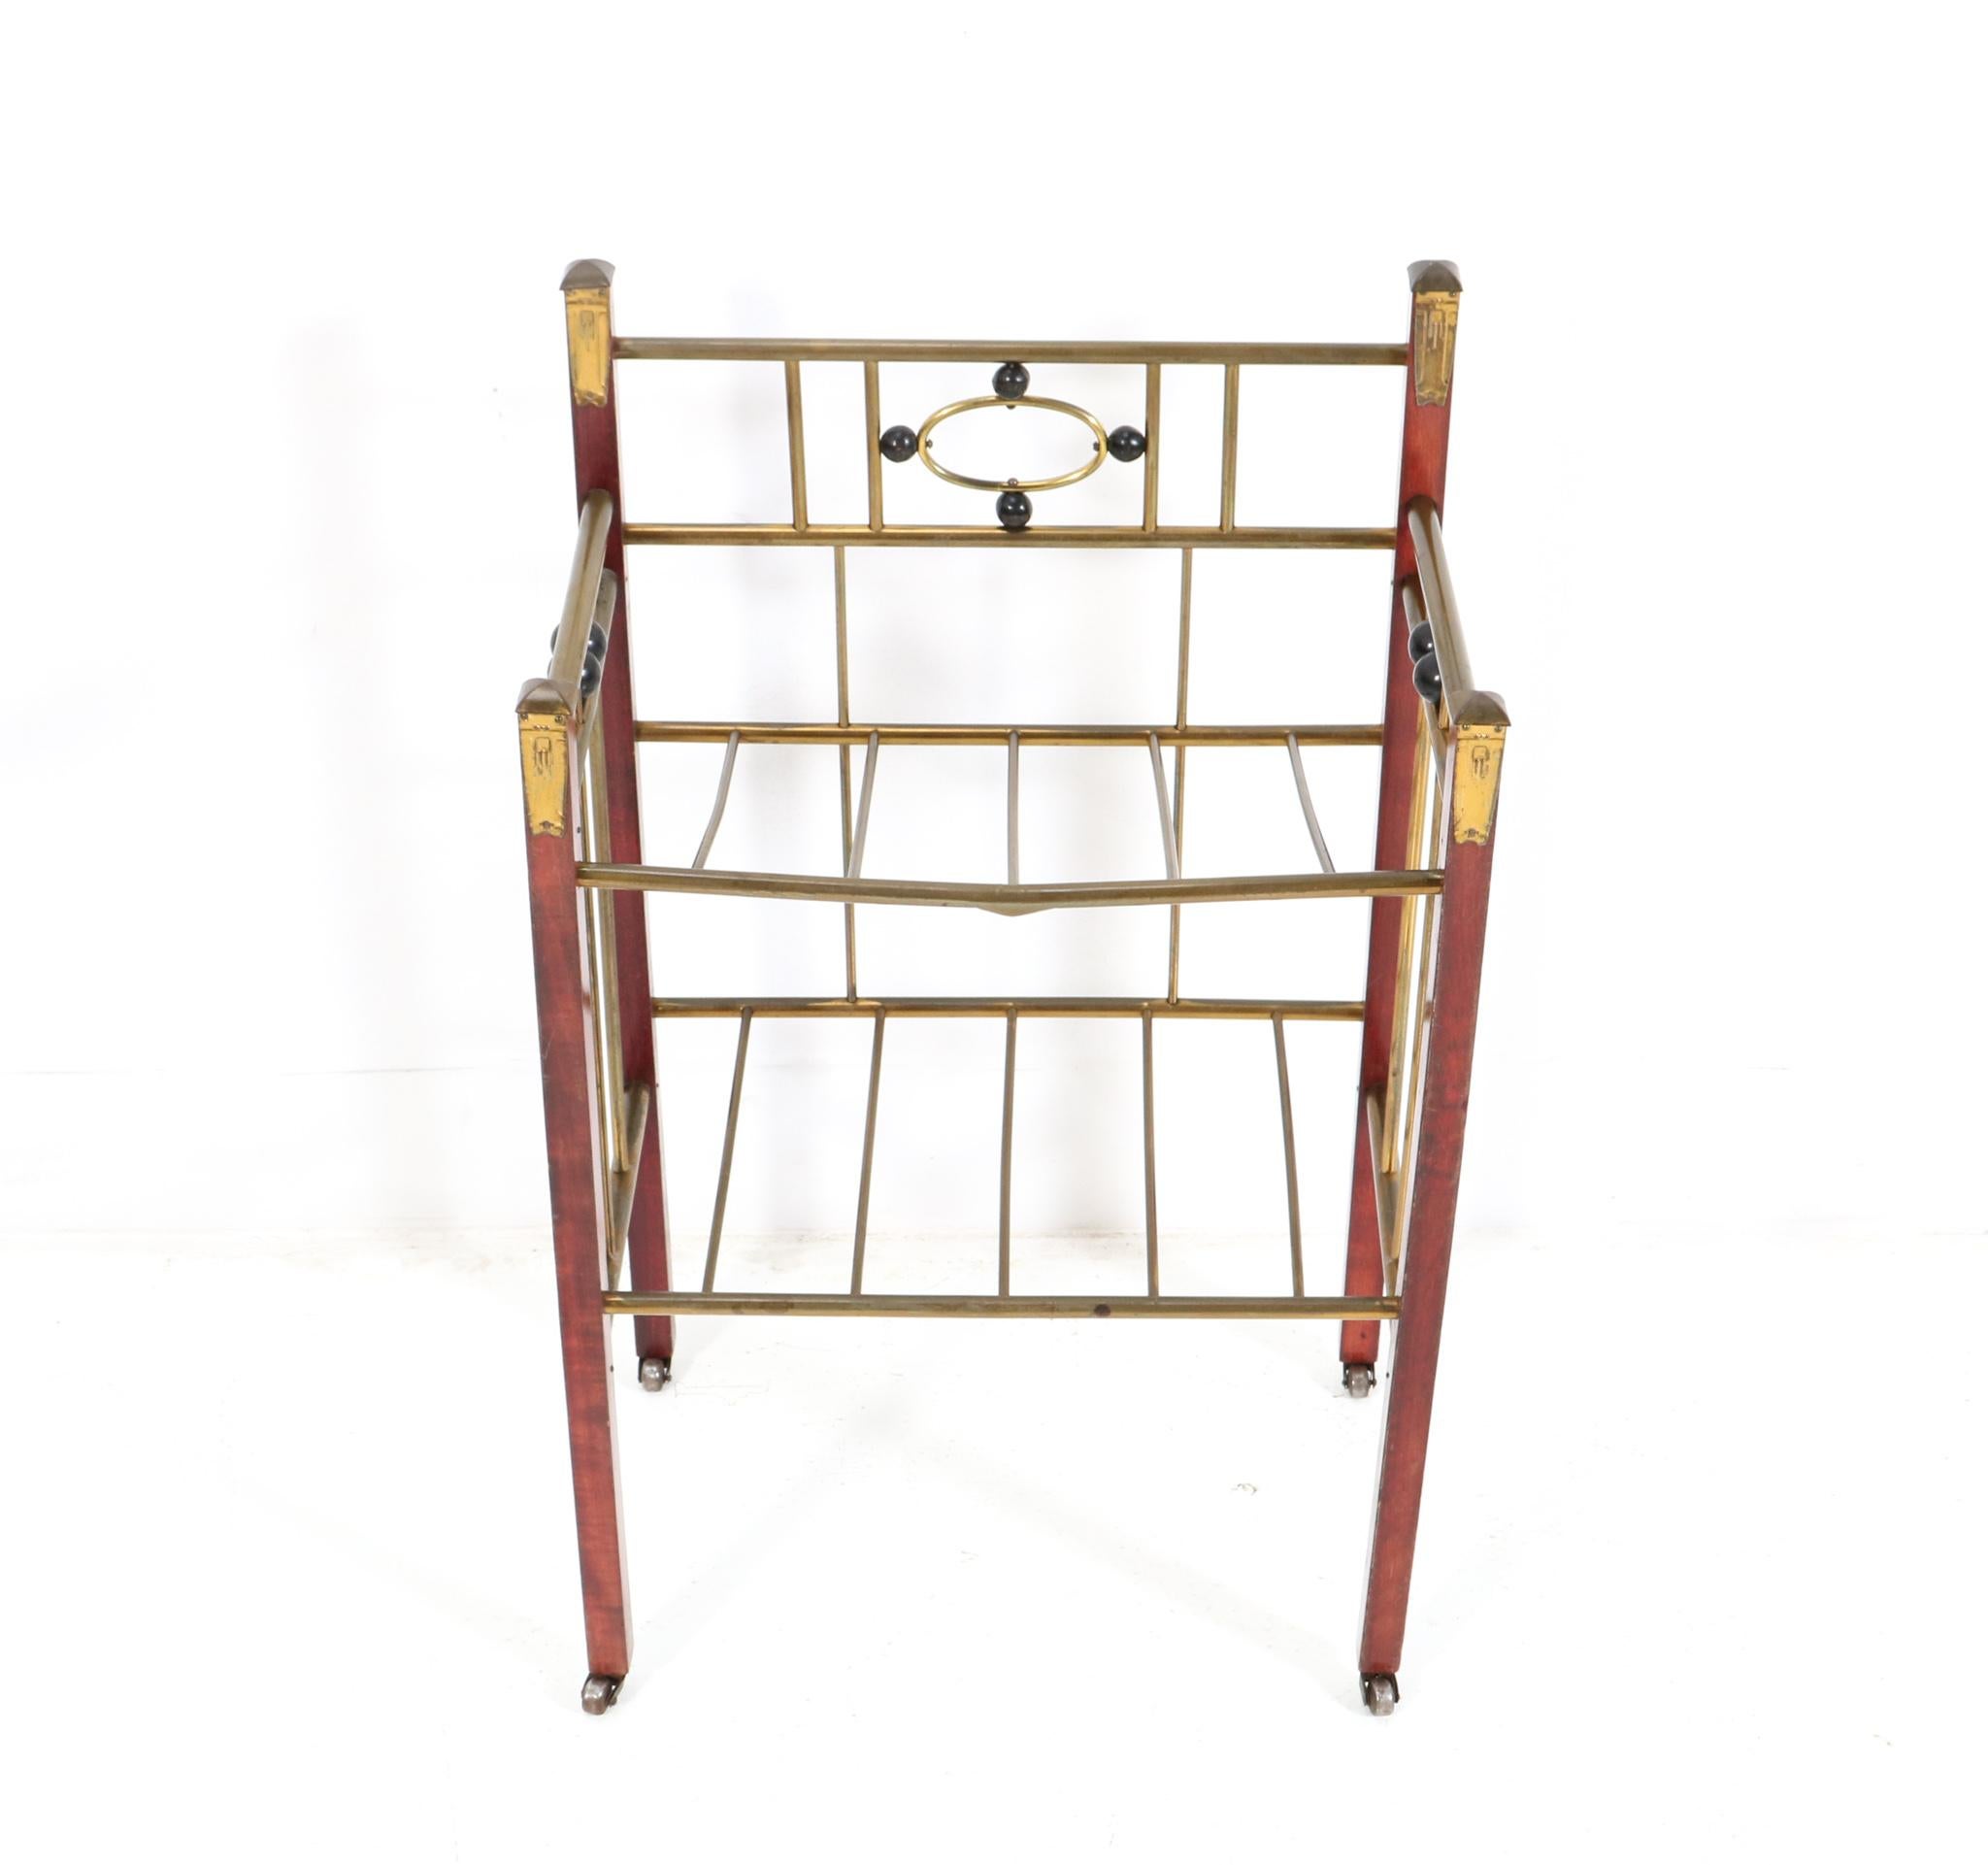 Stunning and rare Vienna Secession magazine rack or stand.
Striking Austrian design from the 1900s.
Lacquered beech and brass frame with original black lacquered elements.
This wonderful Vienna Secession magazine rack or stand is in very good